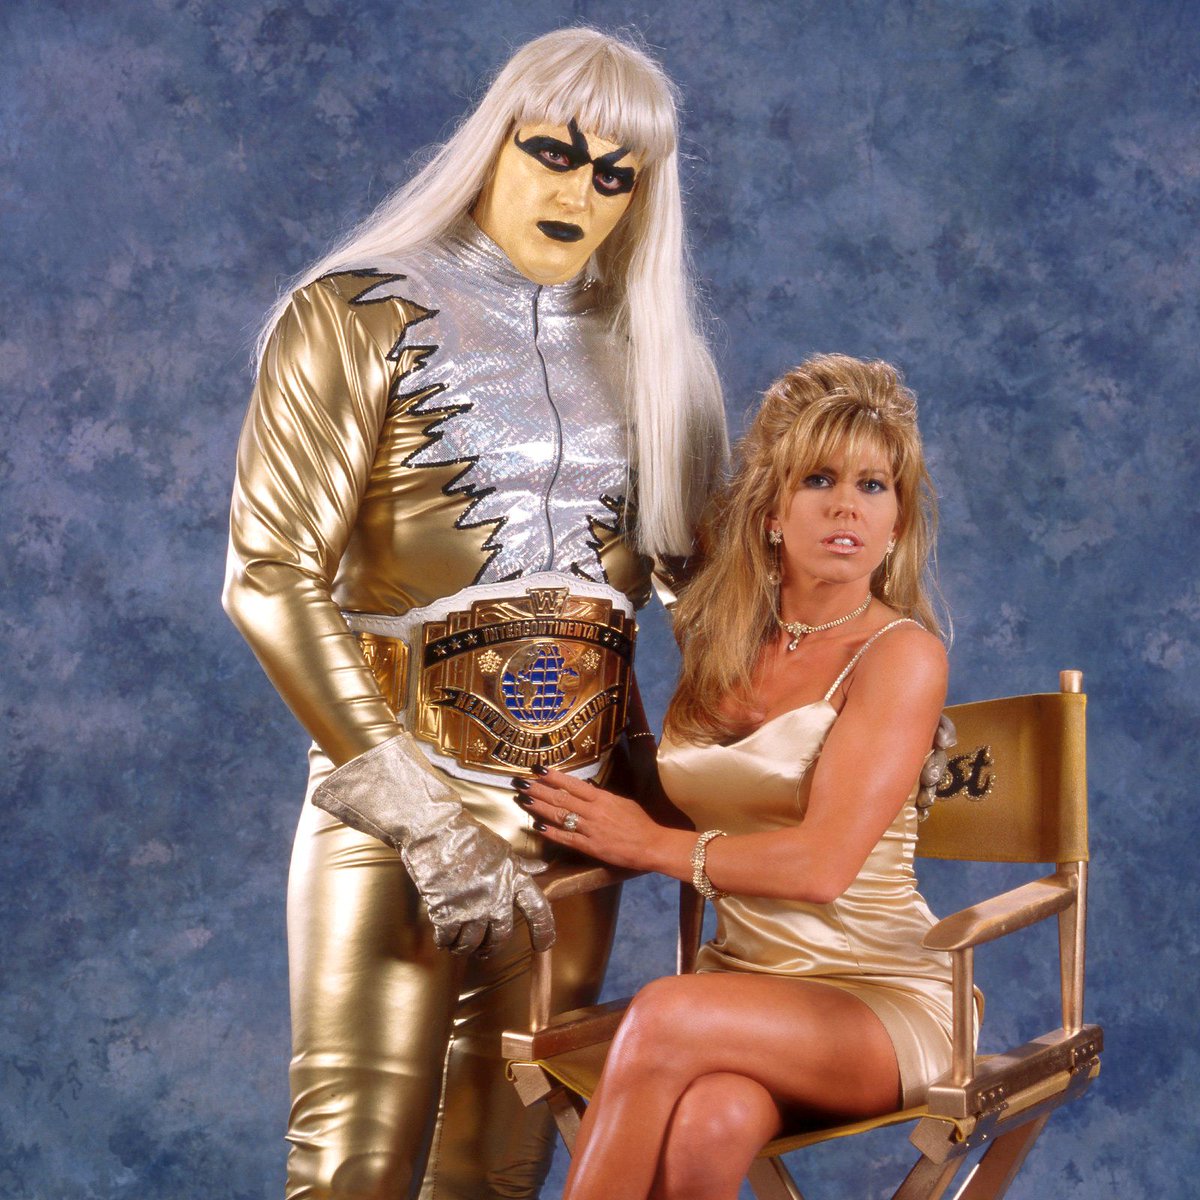 Intercontinental Champion of the day: Goldust - Captured the title on January 21, 1996. Title reign lasted a recognized 64 days. Title was then upheld only to be won back by Goldust to begin an additional 83 day run as champion. 🏆 #WWF #WWE #Wrestling #Marlena #Goldust